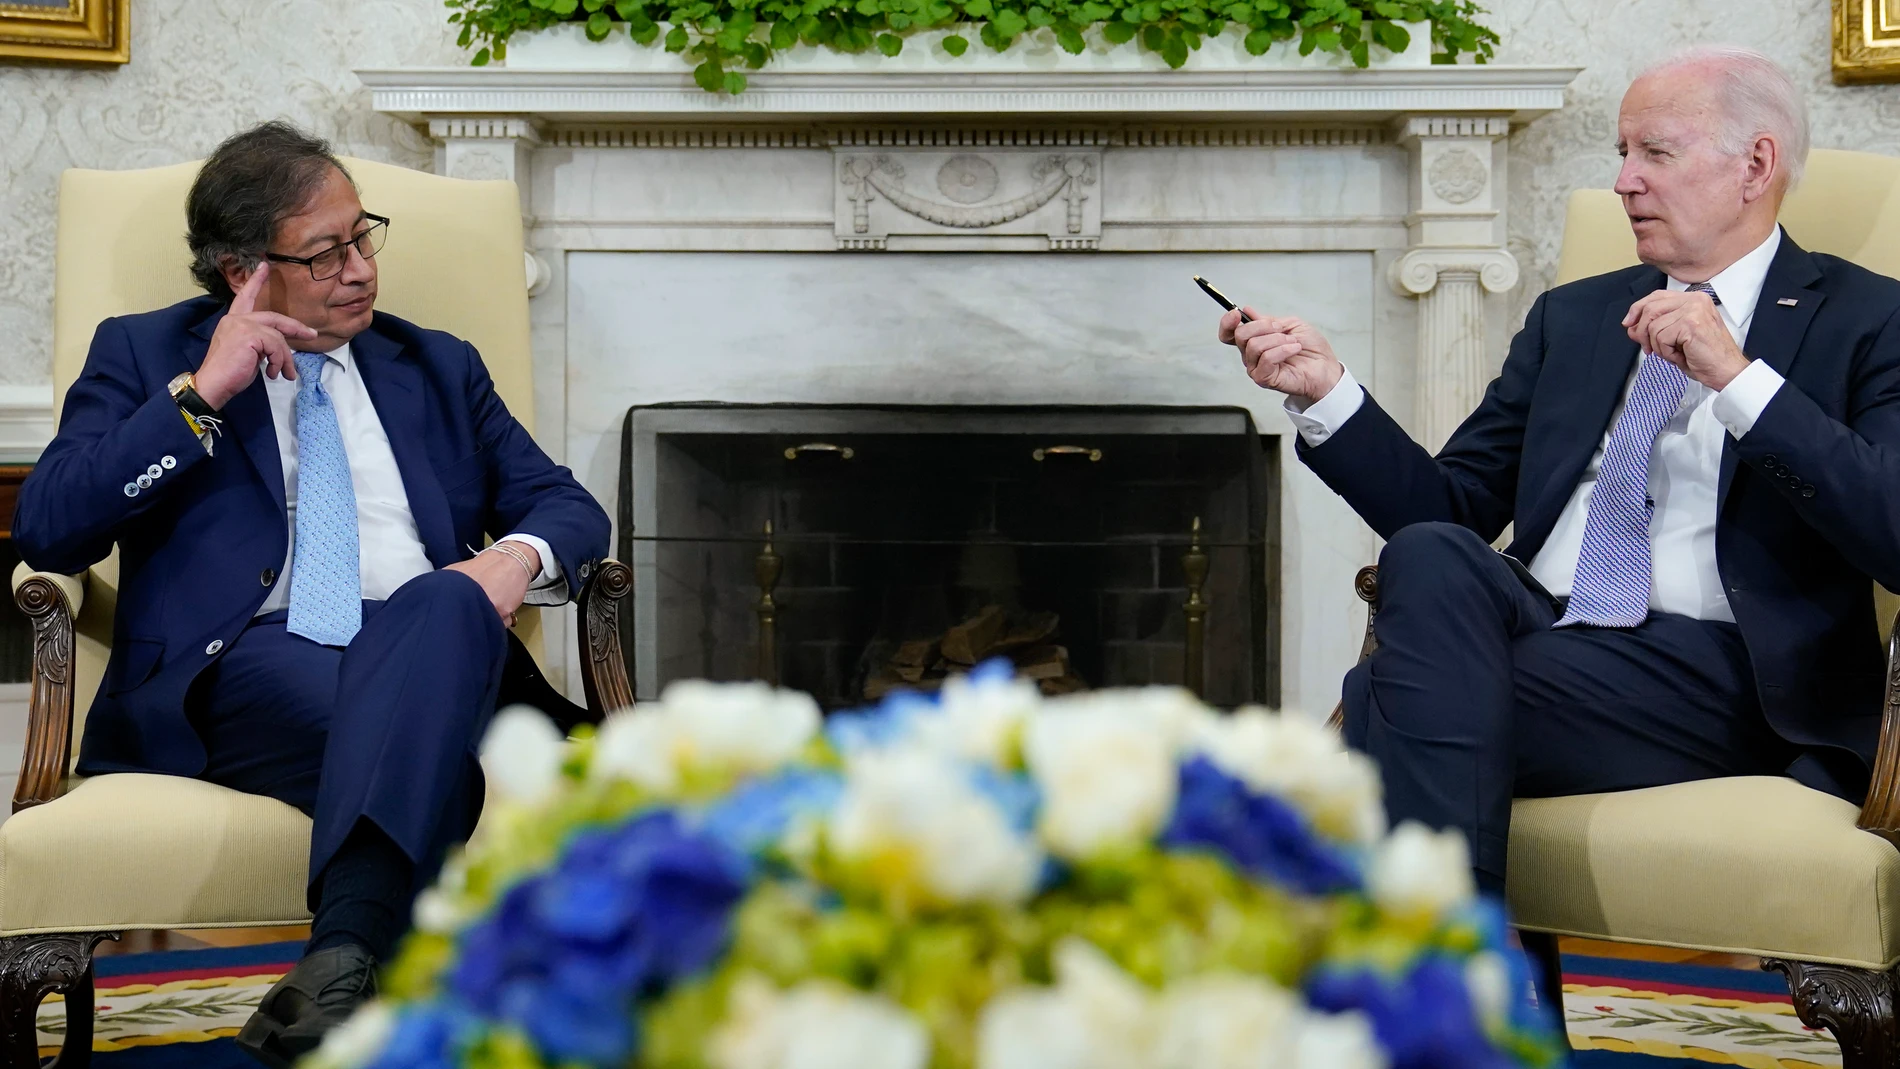 President Joe Biden speaks as he meets withColombian President Gustavo Petroin the Oval Office of the White House in Washington, Thursday, April 20, 2023. (AP Photo/Susan Walsh)